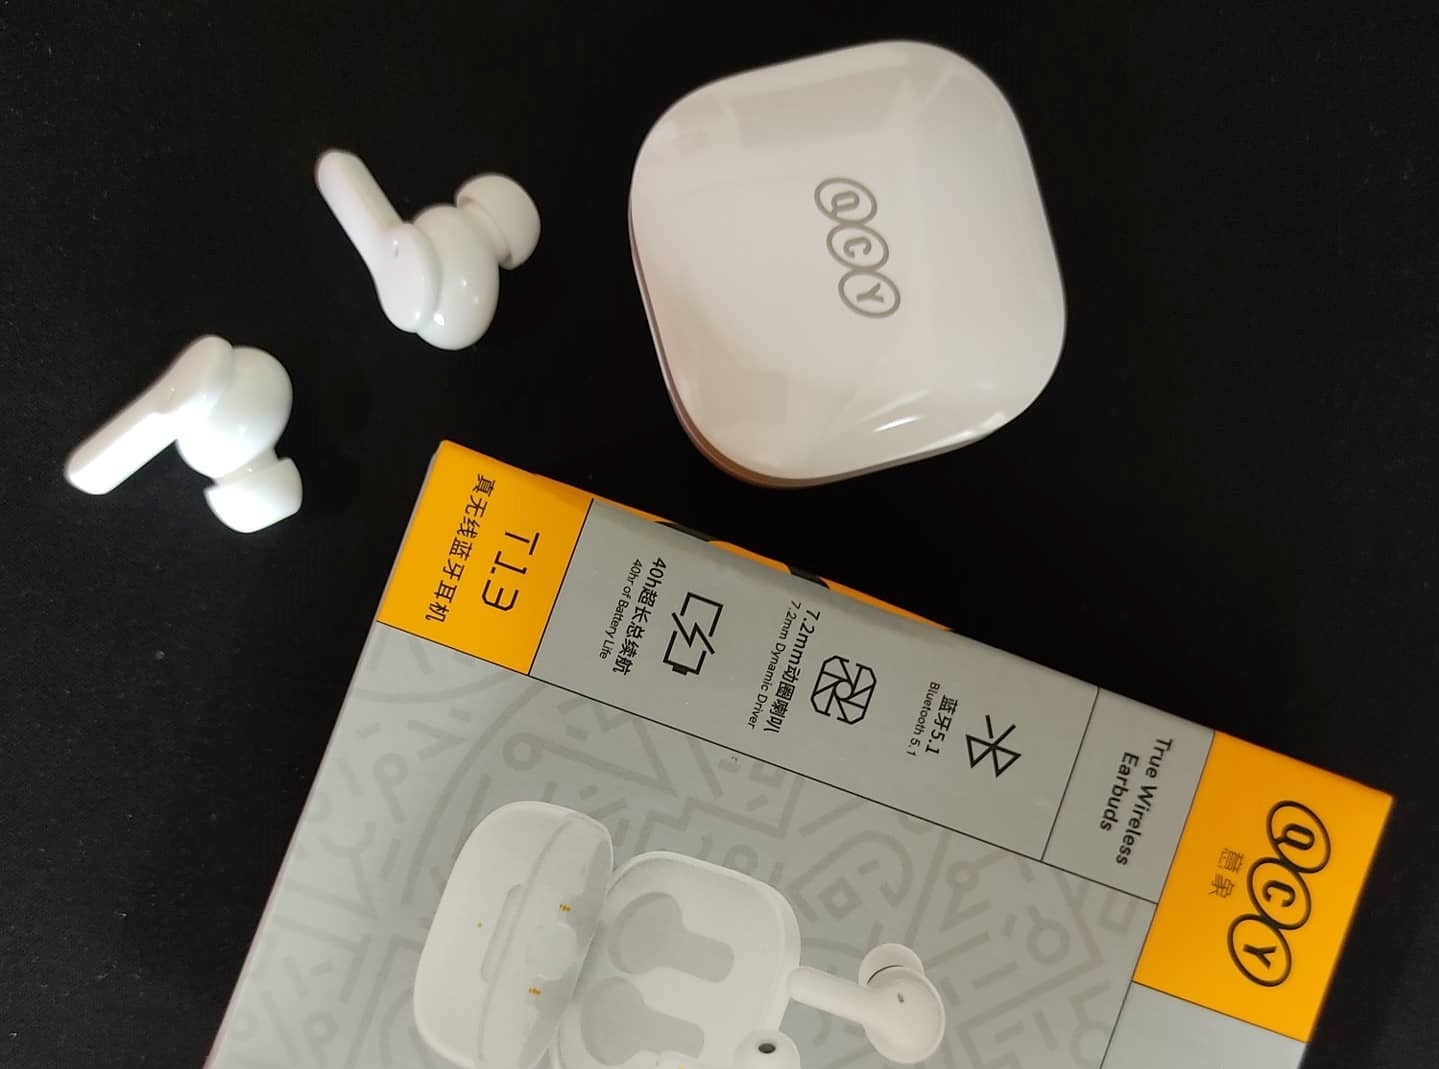 qcy-t13-earphone-review